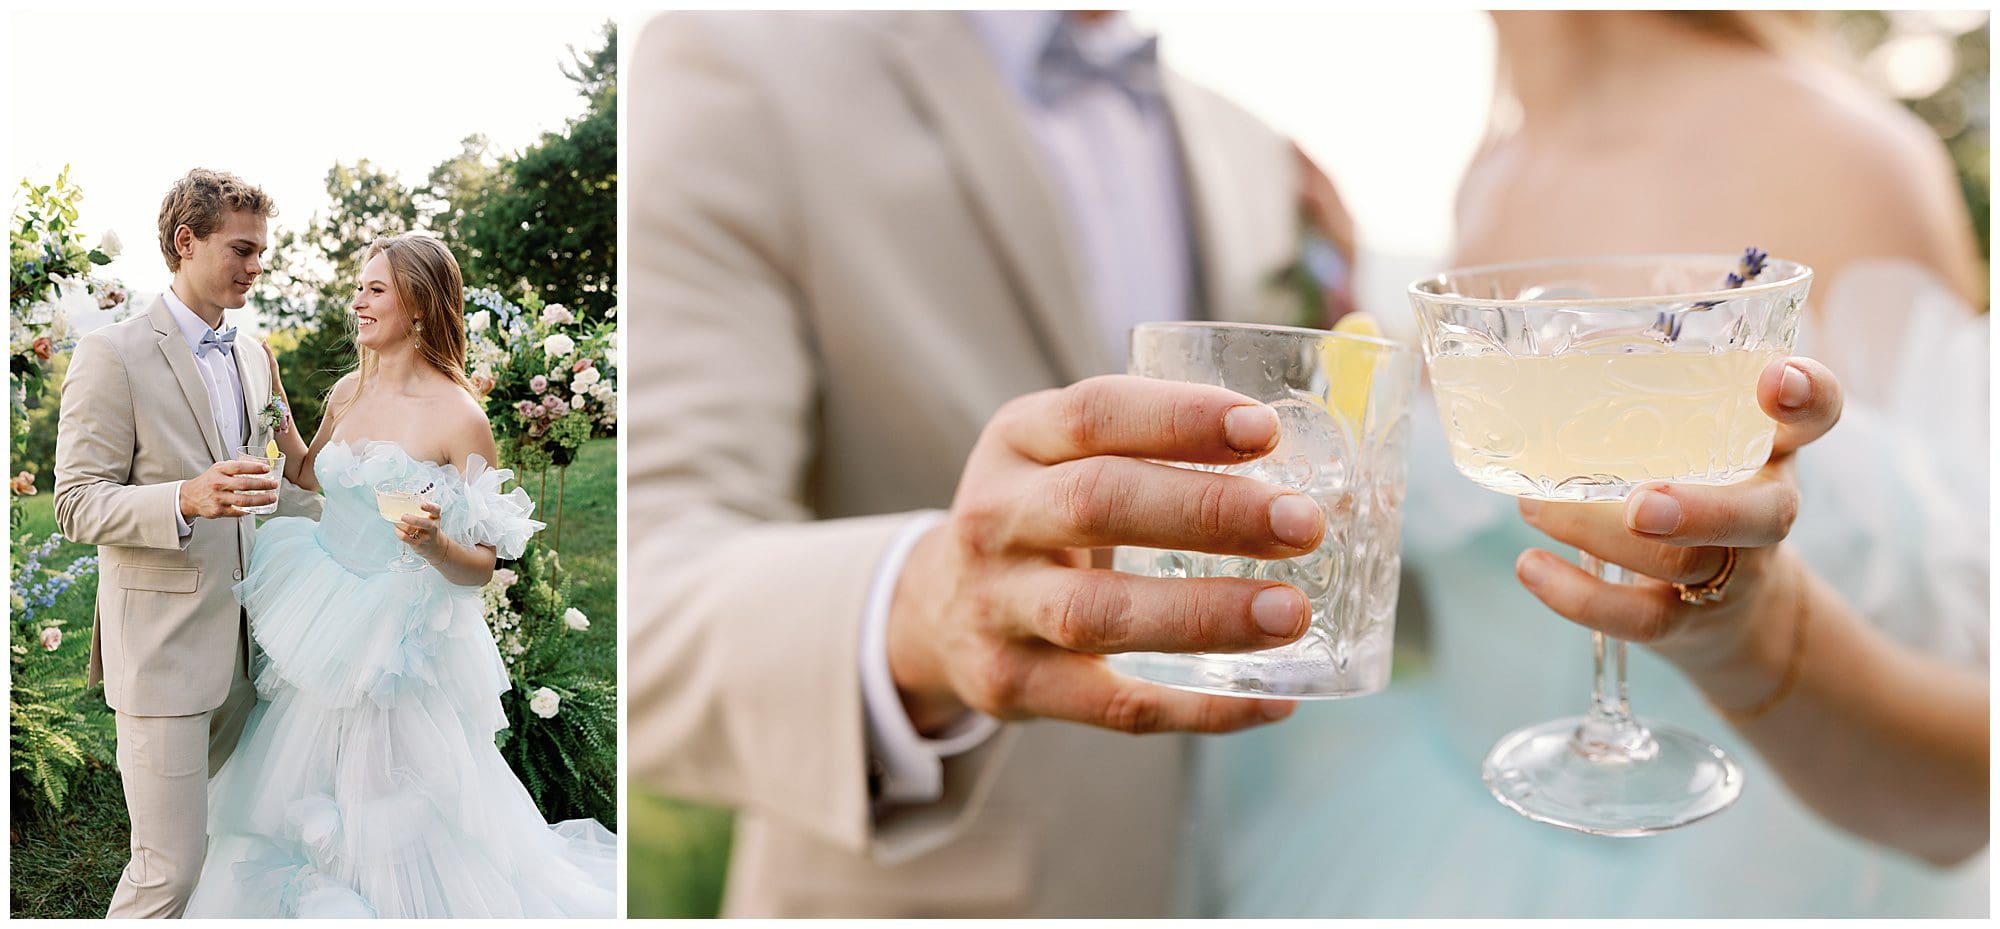 A Parisian-inspired summer wedding at The Ridge featuring a bride and groom toasting with a glass of champagne.